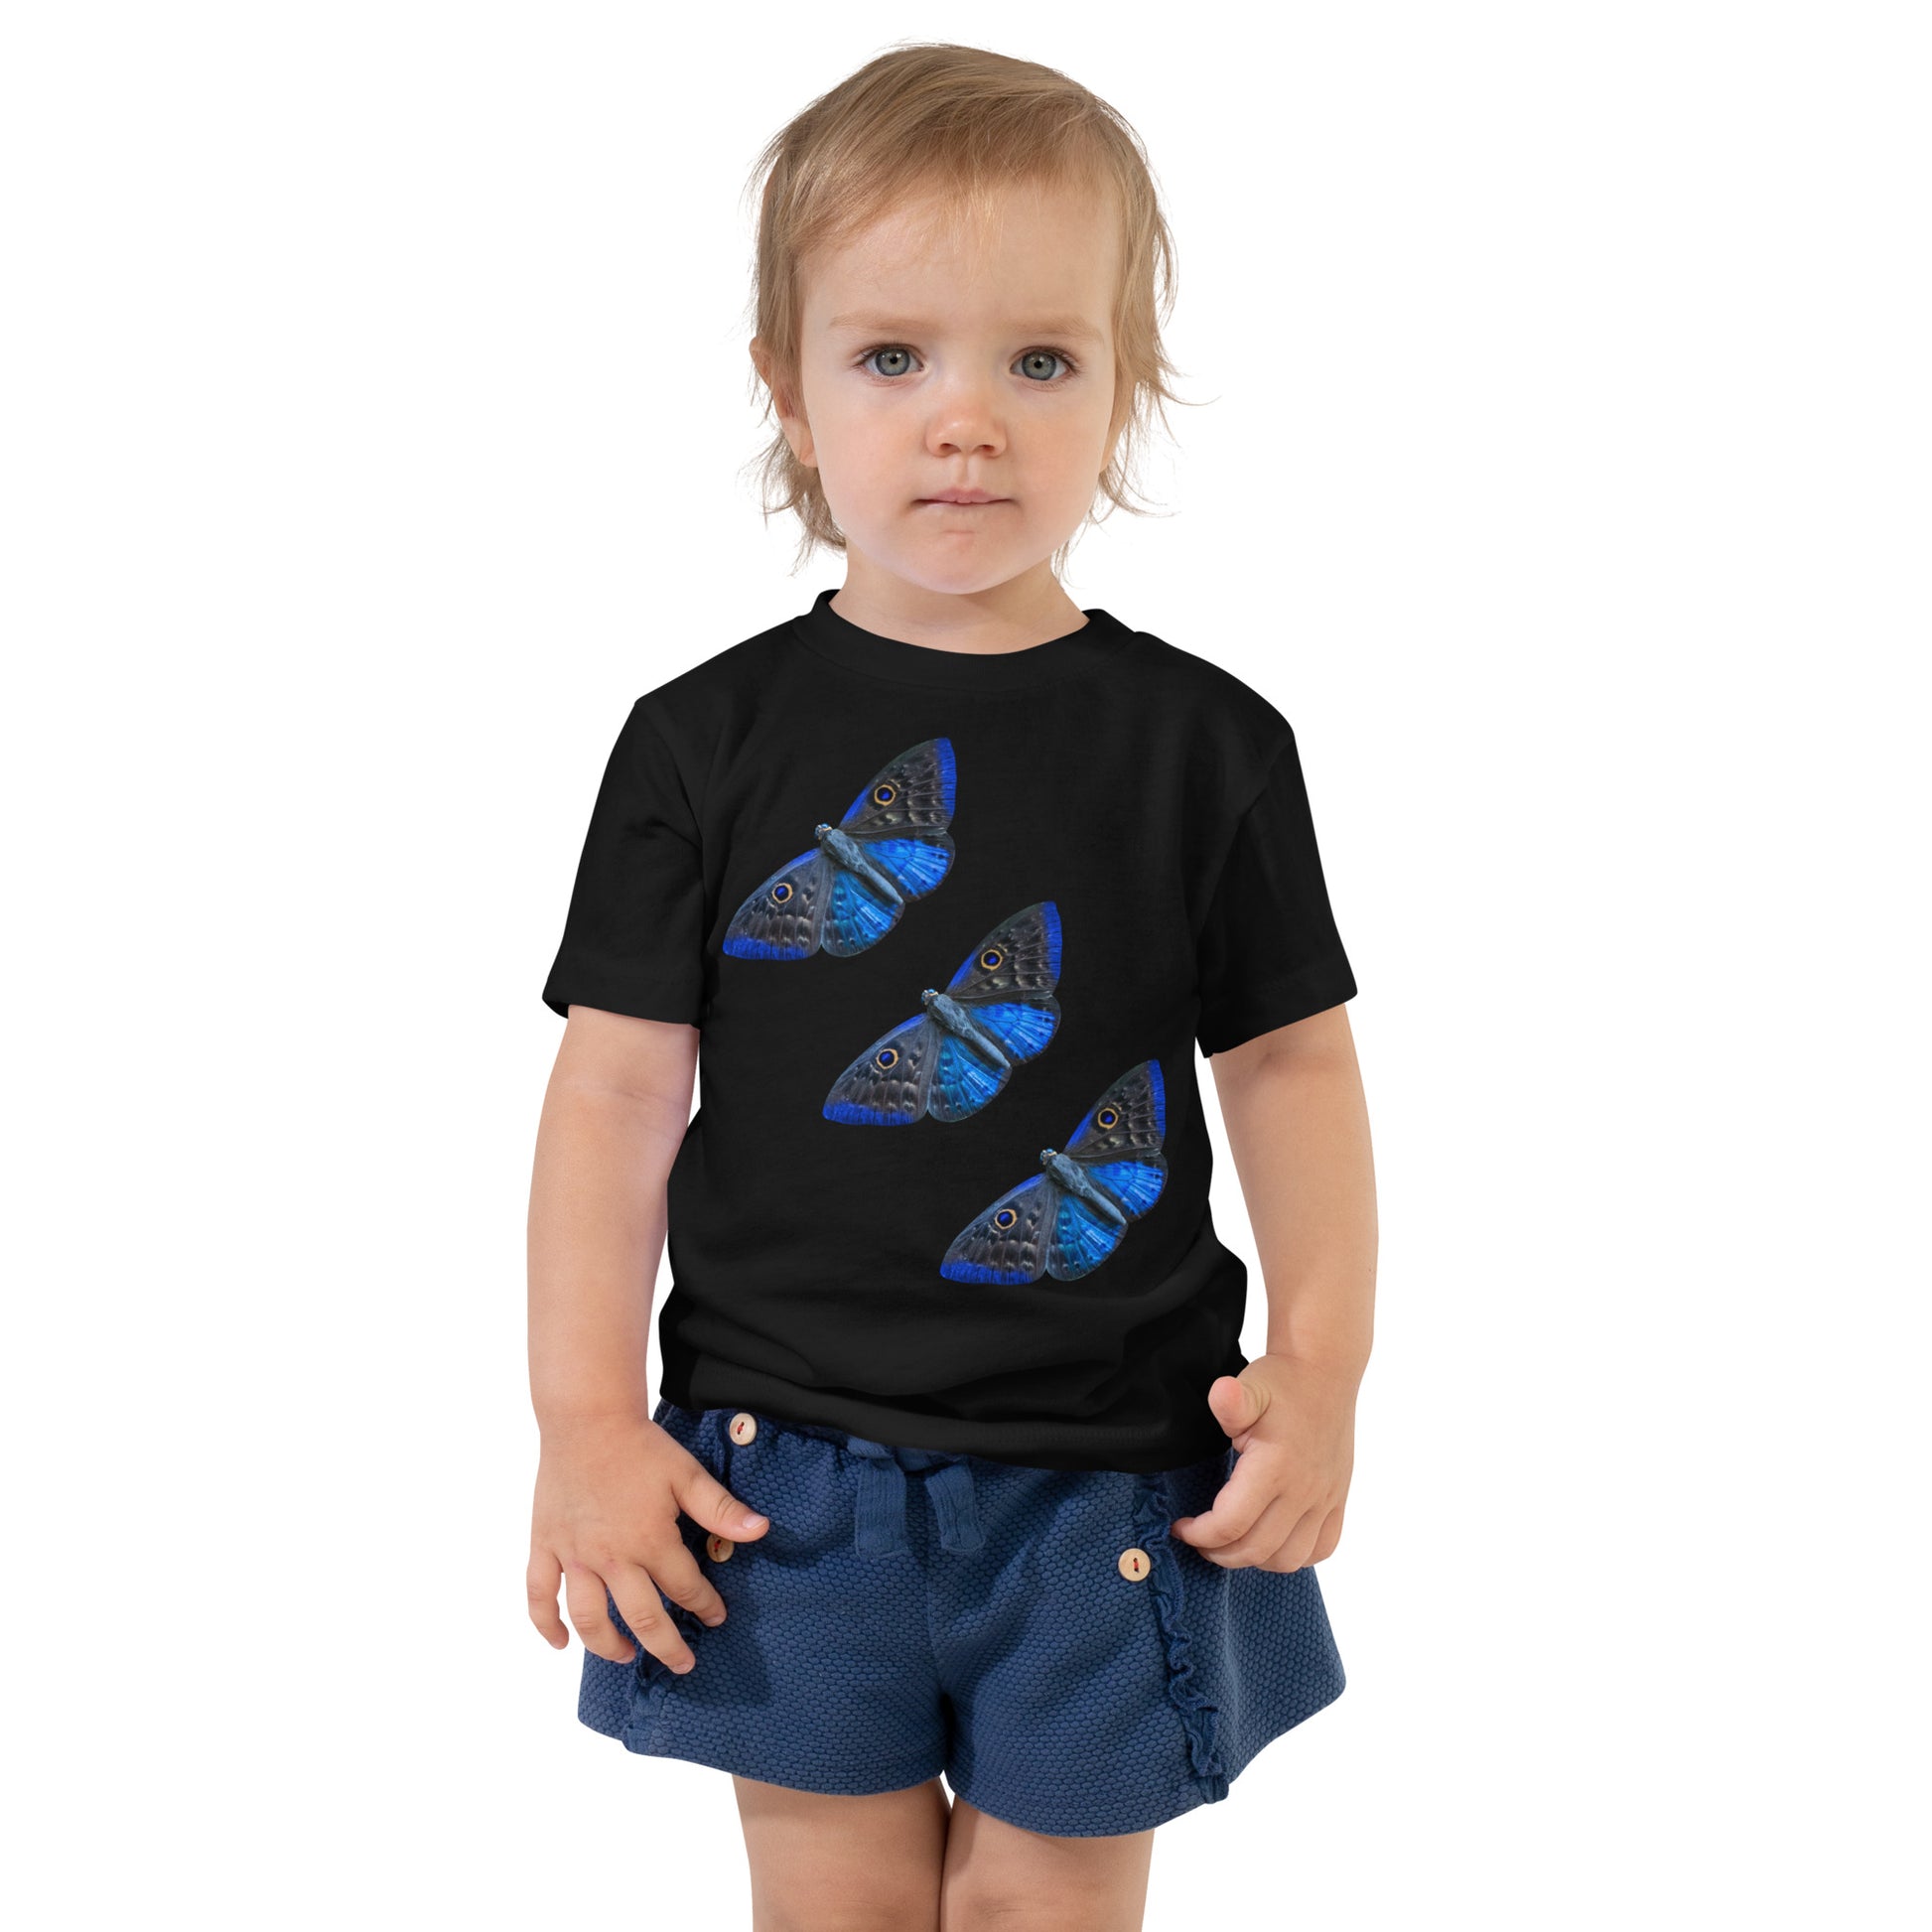 toddler with black t-shirt with print of 3 blue butterfly's  